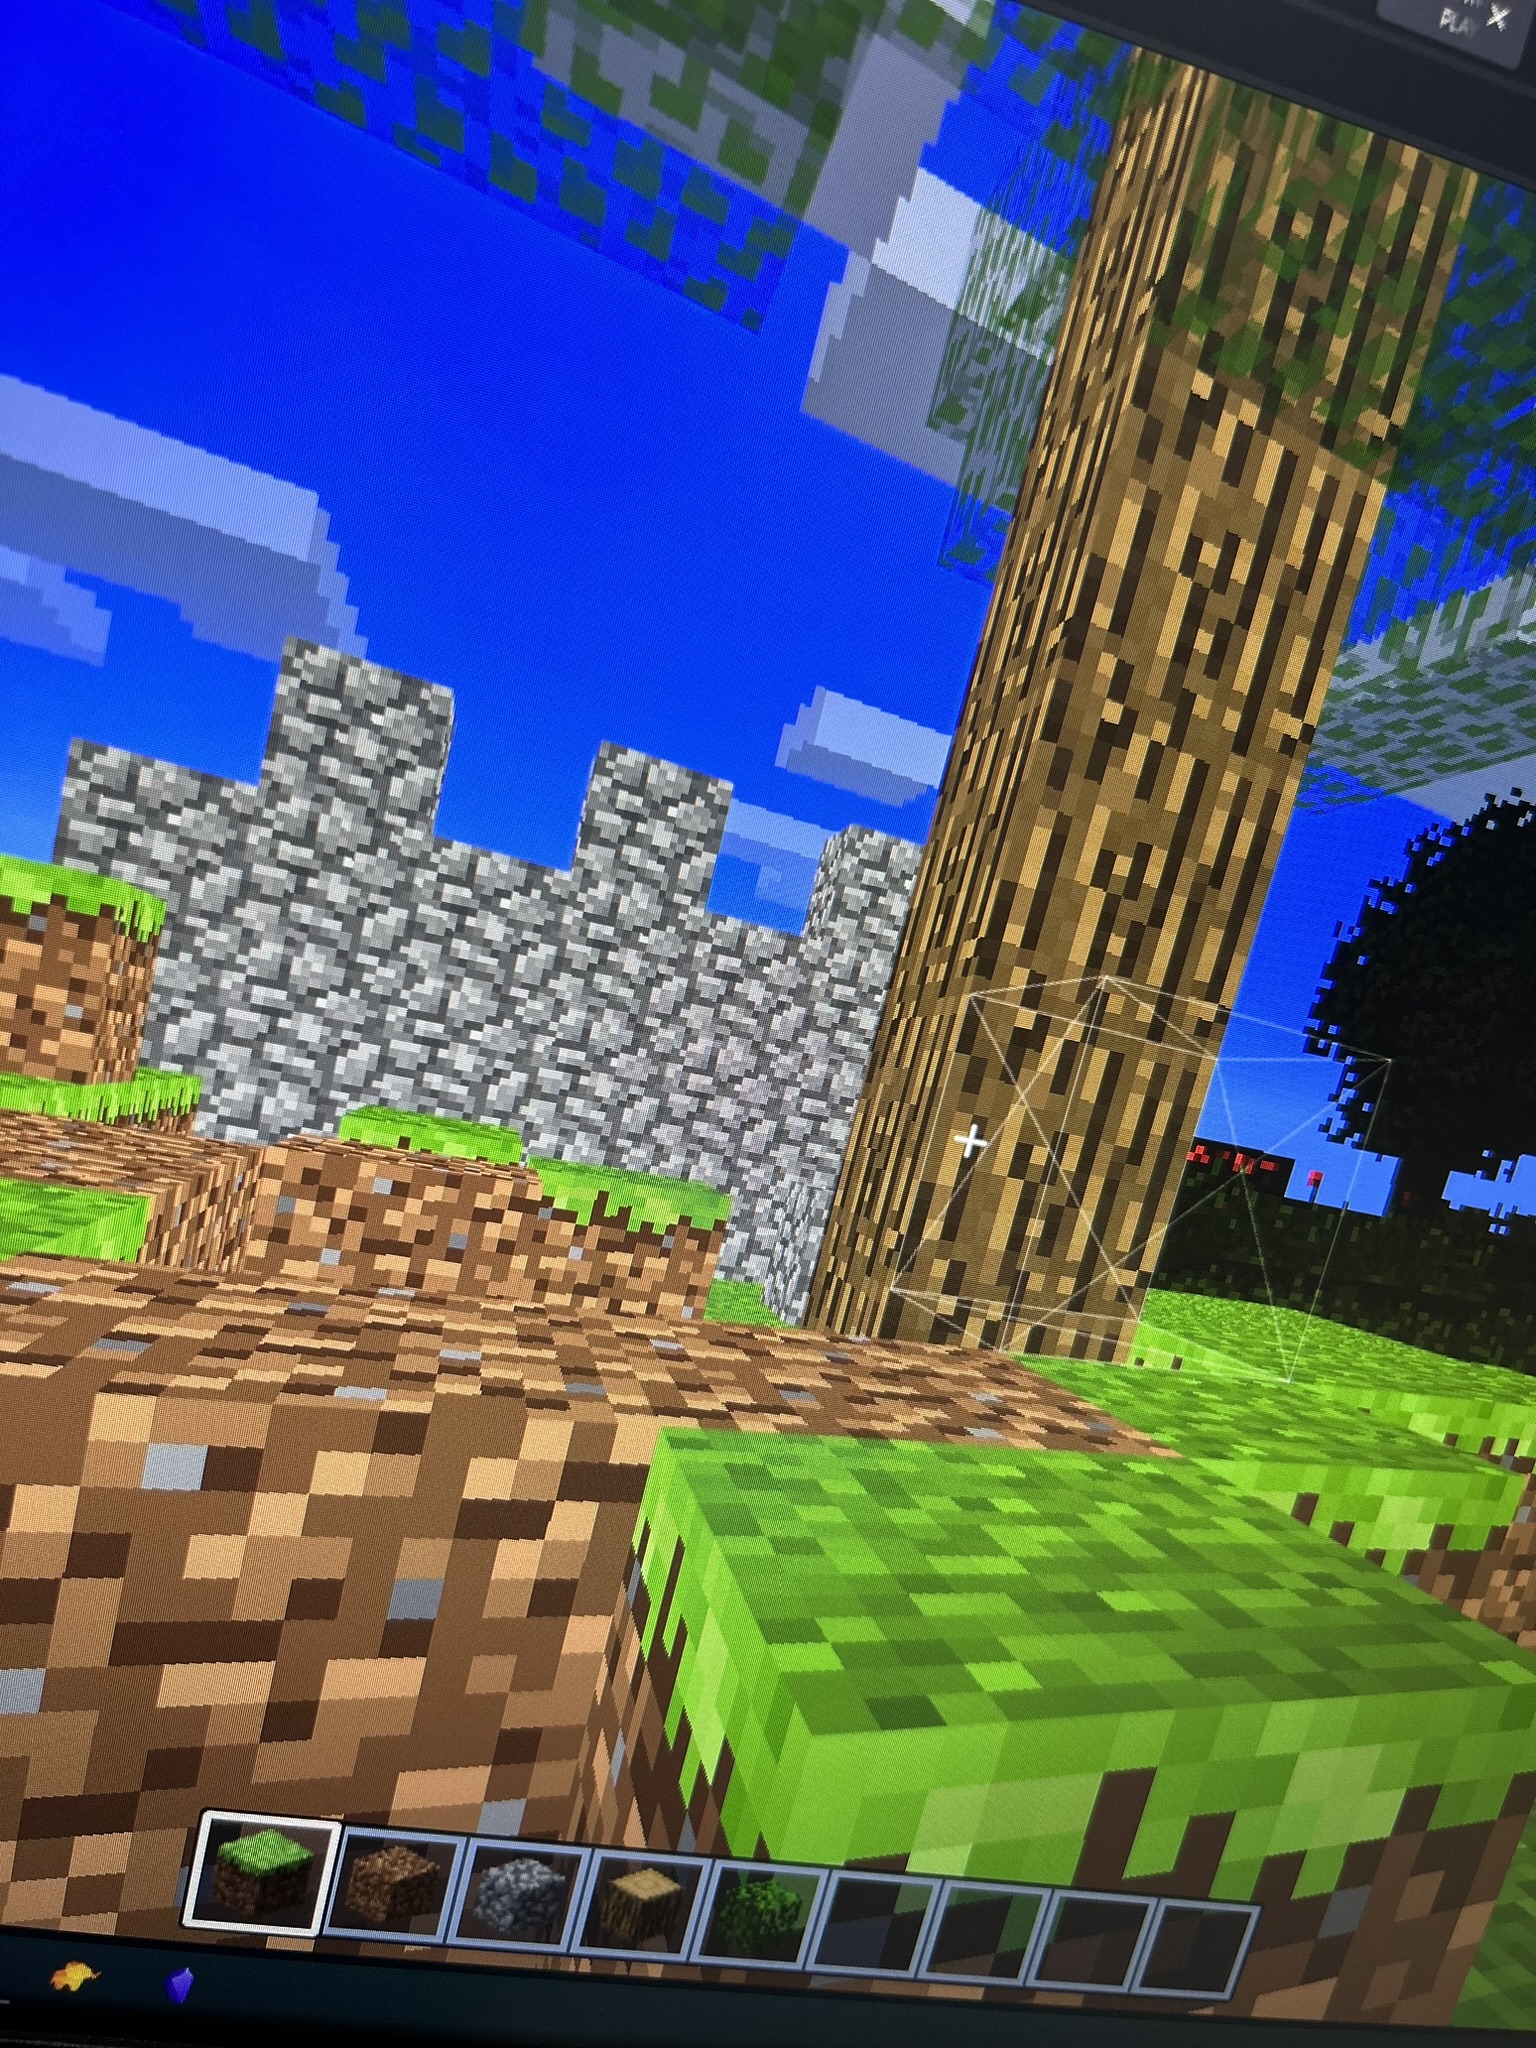 A Minecraft-like sandbox game. There\'s a block selector at the bottom which includes a grass, dirt, cobblestone, wood and leaves block. In front, there are grass and leaves block placed in the terrain.